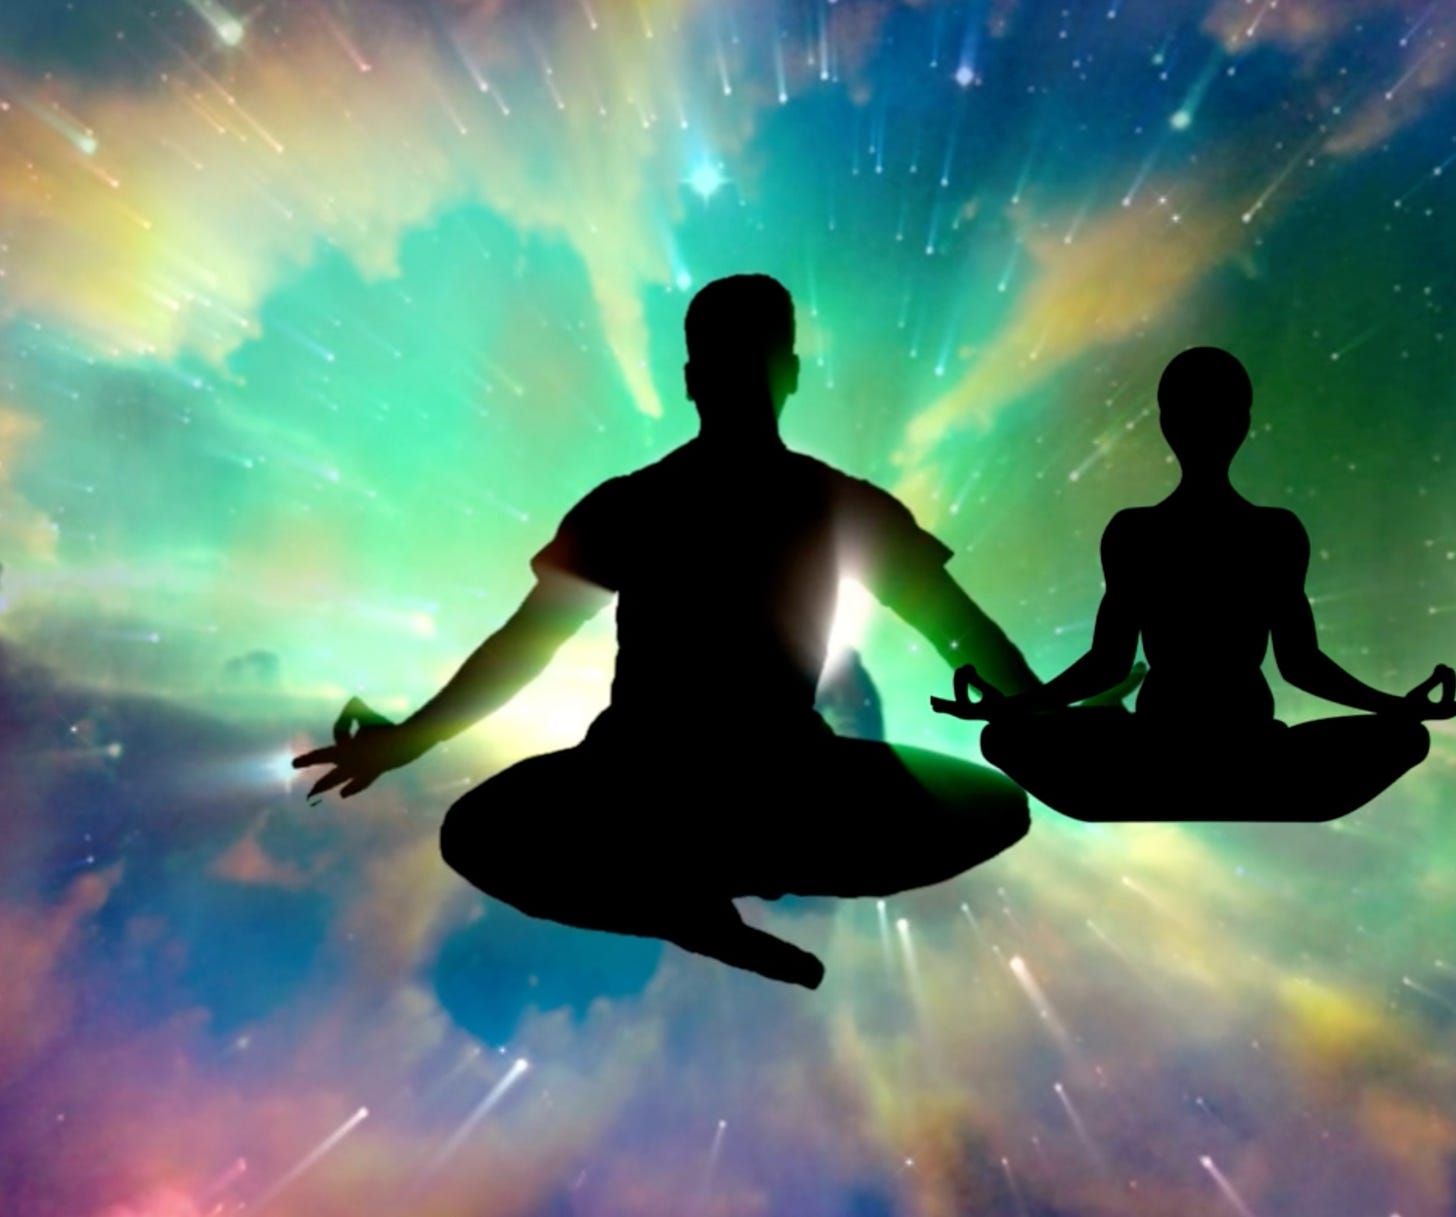 The image shows two silhouette figures sitting and meditating in a sparkling mesmerising background. The image is part of the article titled "Bhagavad Gita and Meditation: Immunity in times of pandemic" authored by Anish Prasad and published at https://rationalastro.org